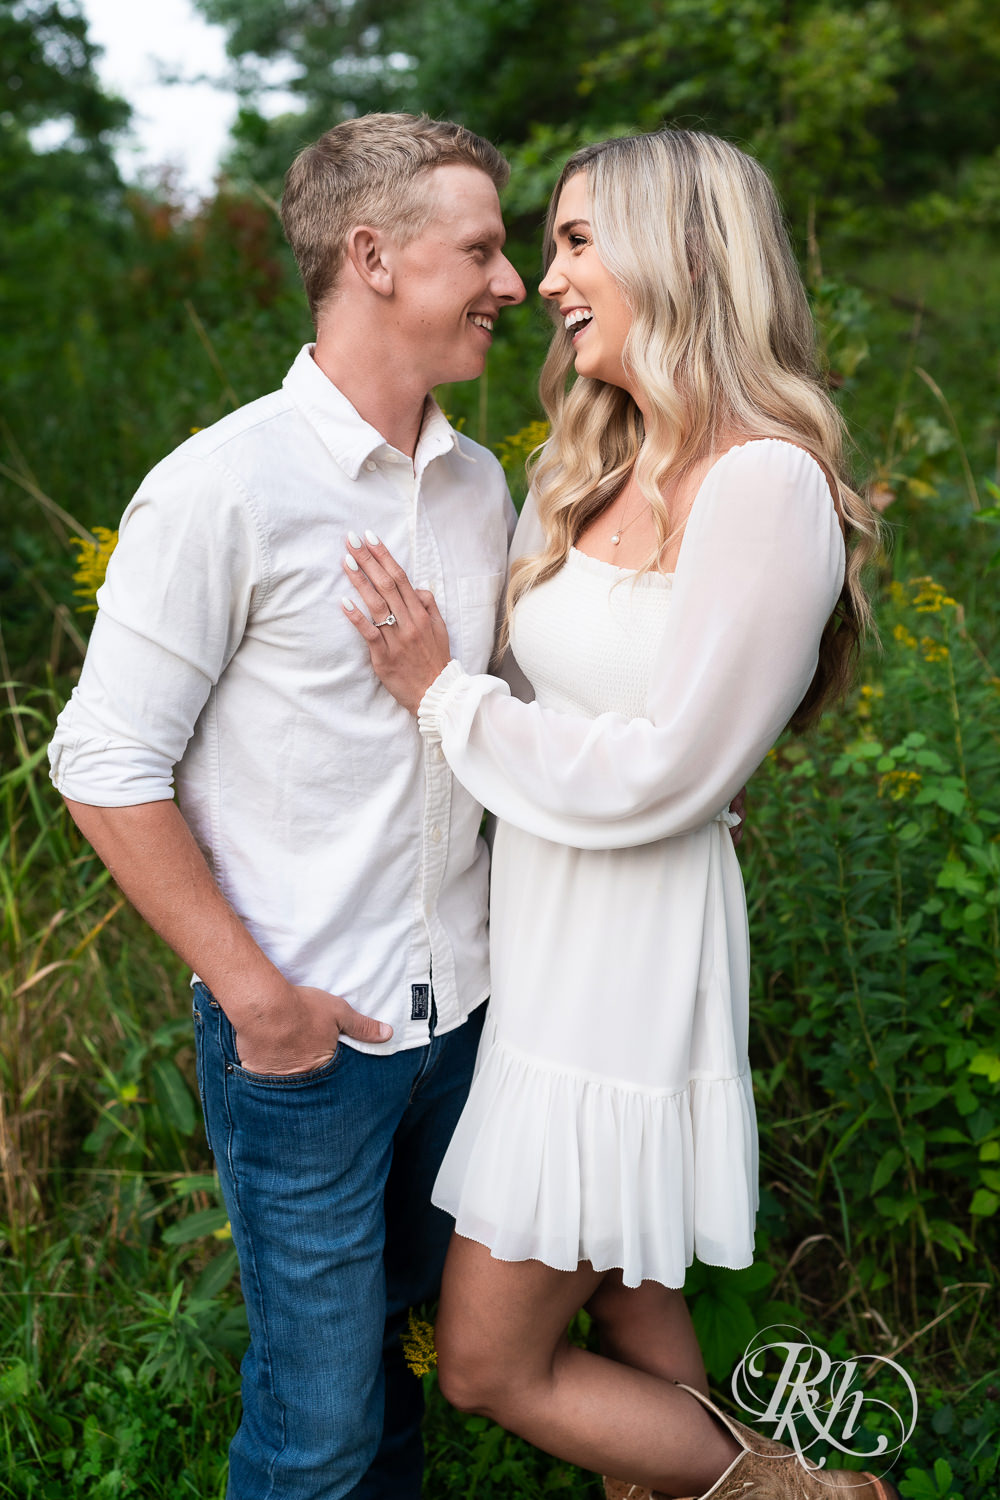 Man and woman in white and cowboy boots smile during engagement photography at Lebanon Hills Regional Park in Eagan, Minnesota.